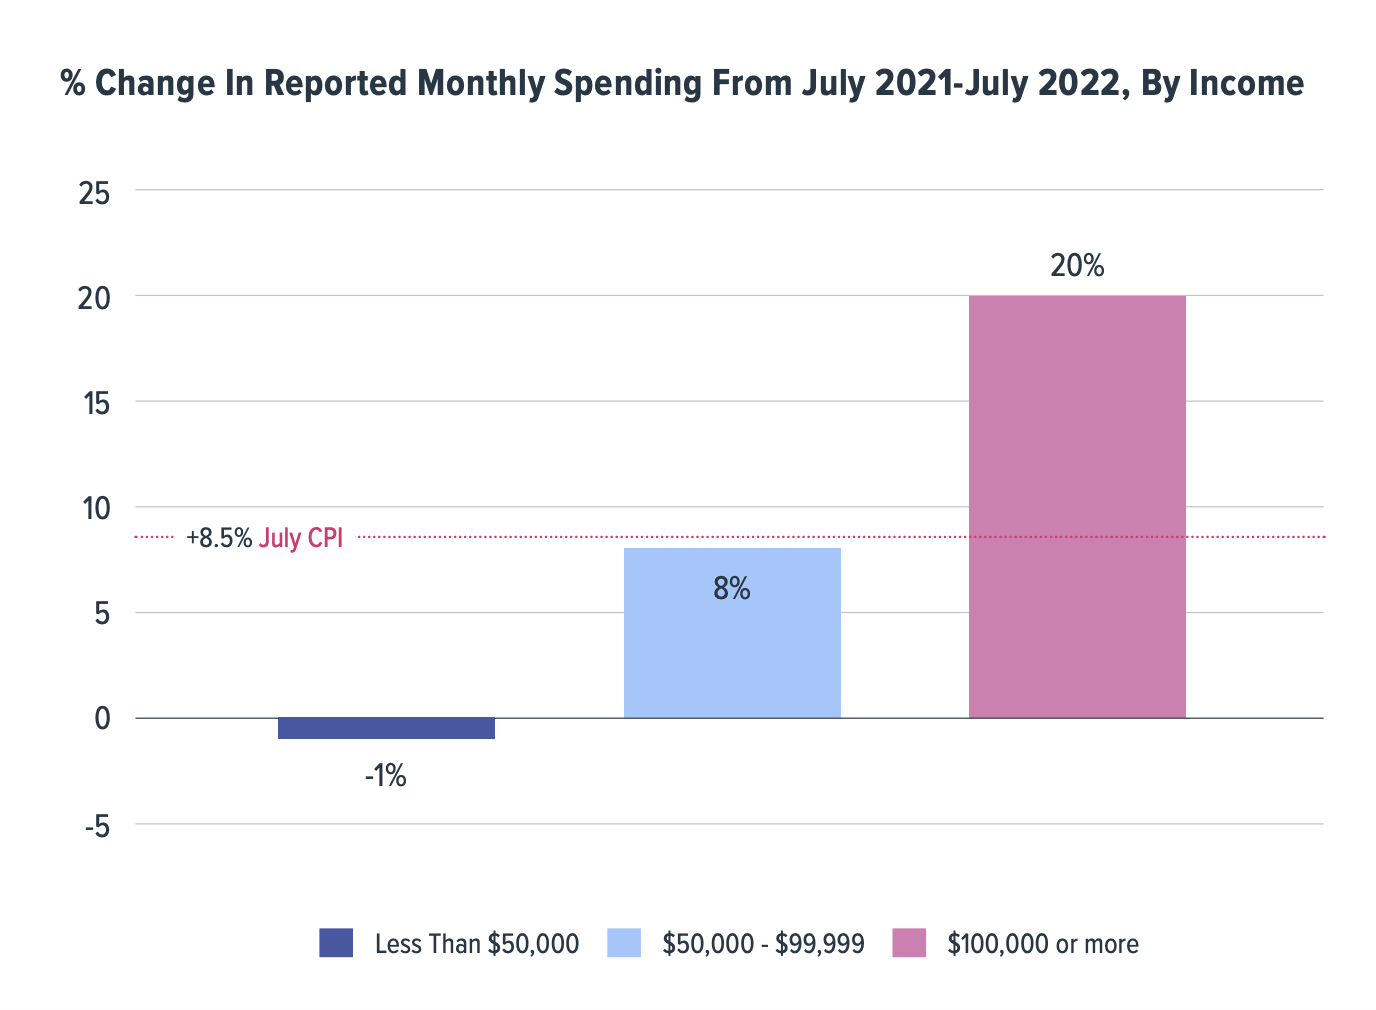 Reported Monthly Spending Change By Income